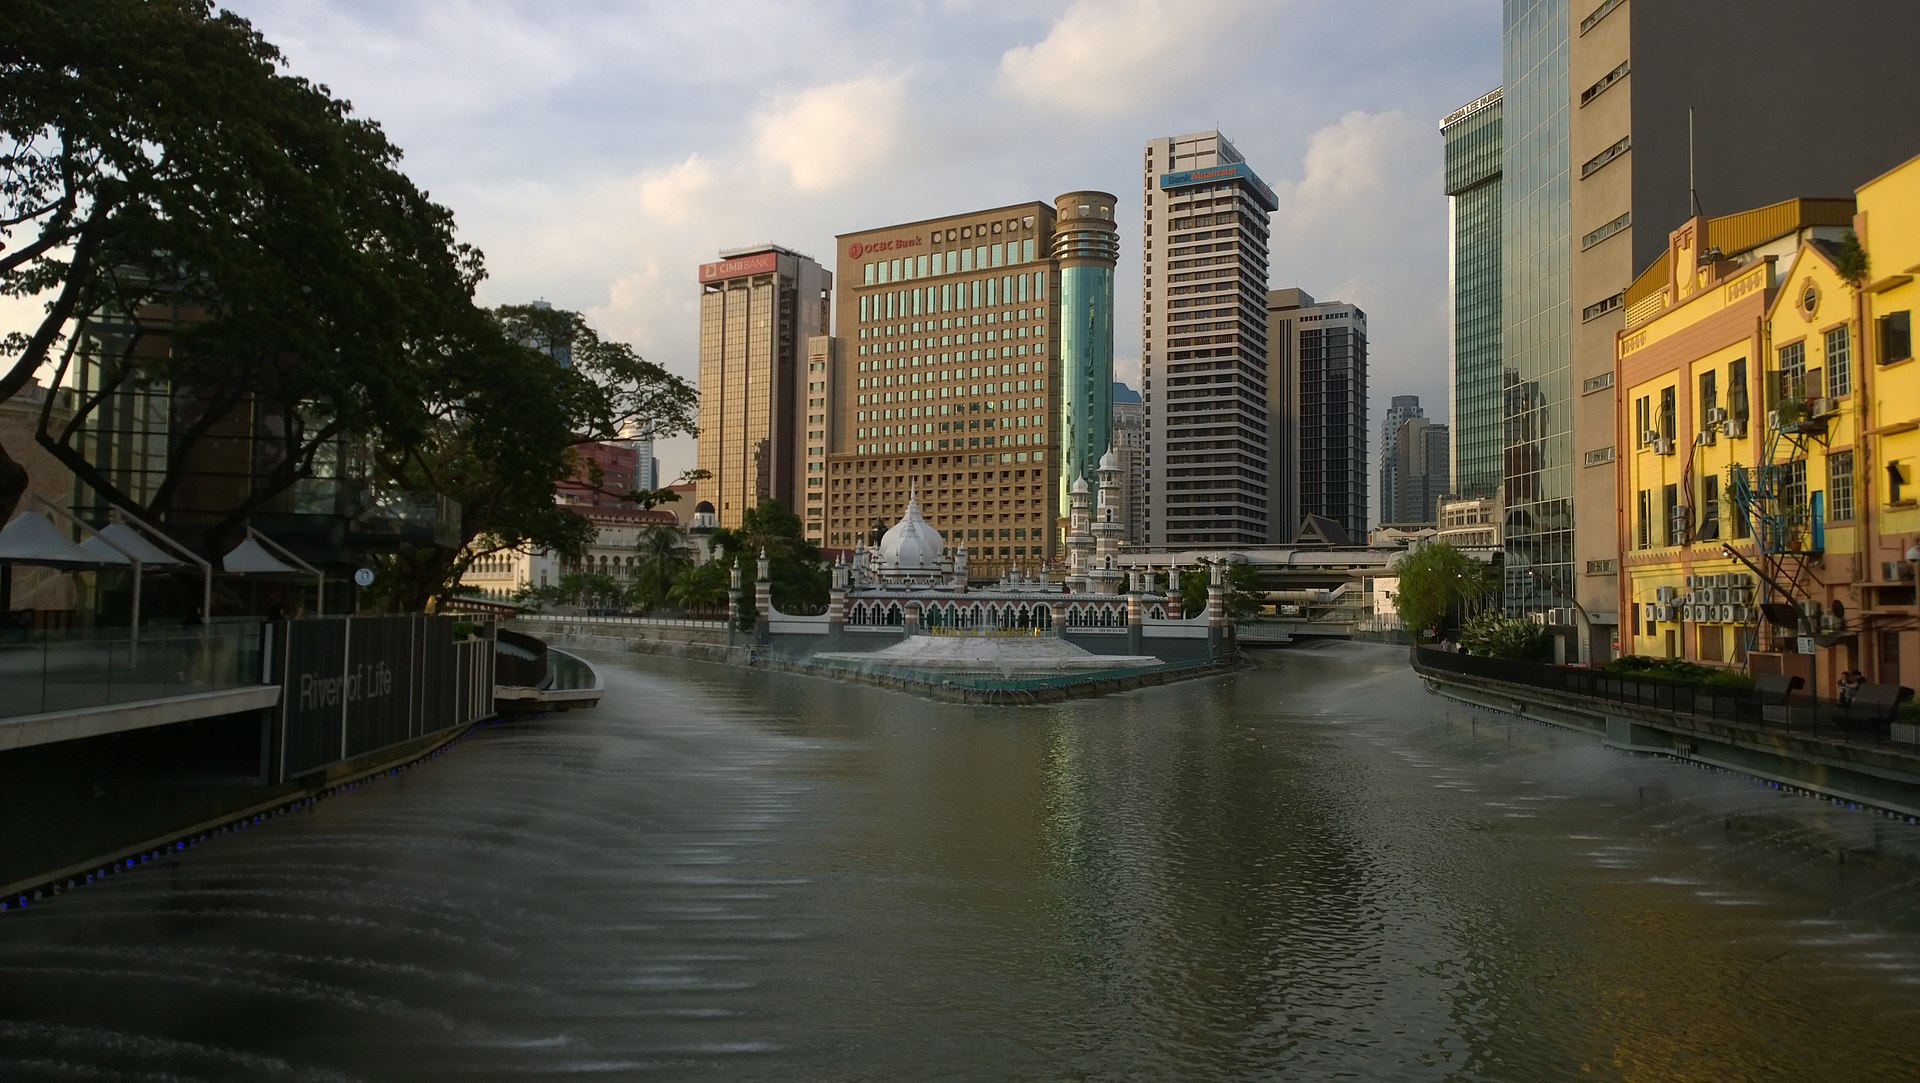 Here's why coldplay sponsors rm3. 2mil to clean up the klang river | weirdkaya